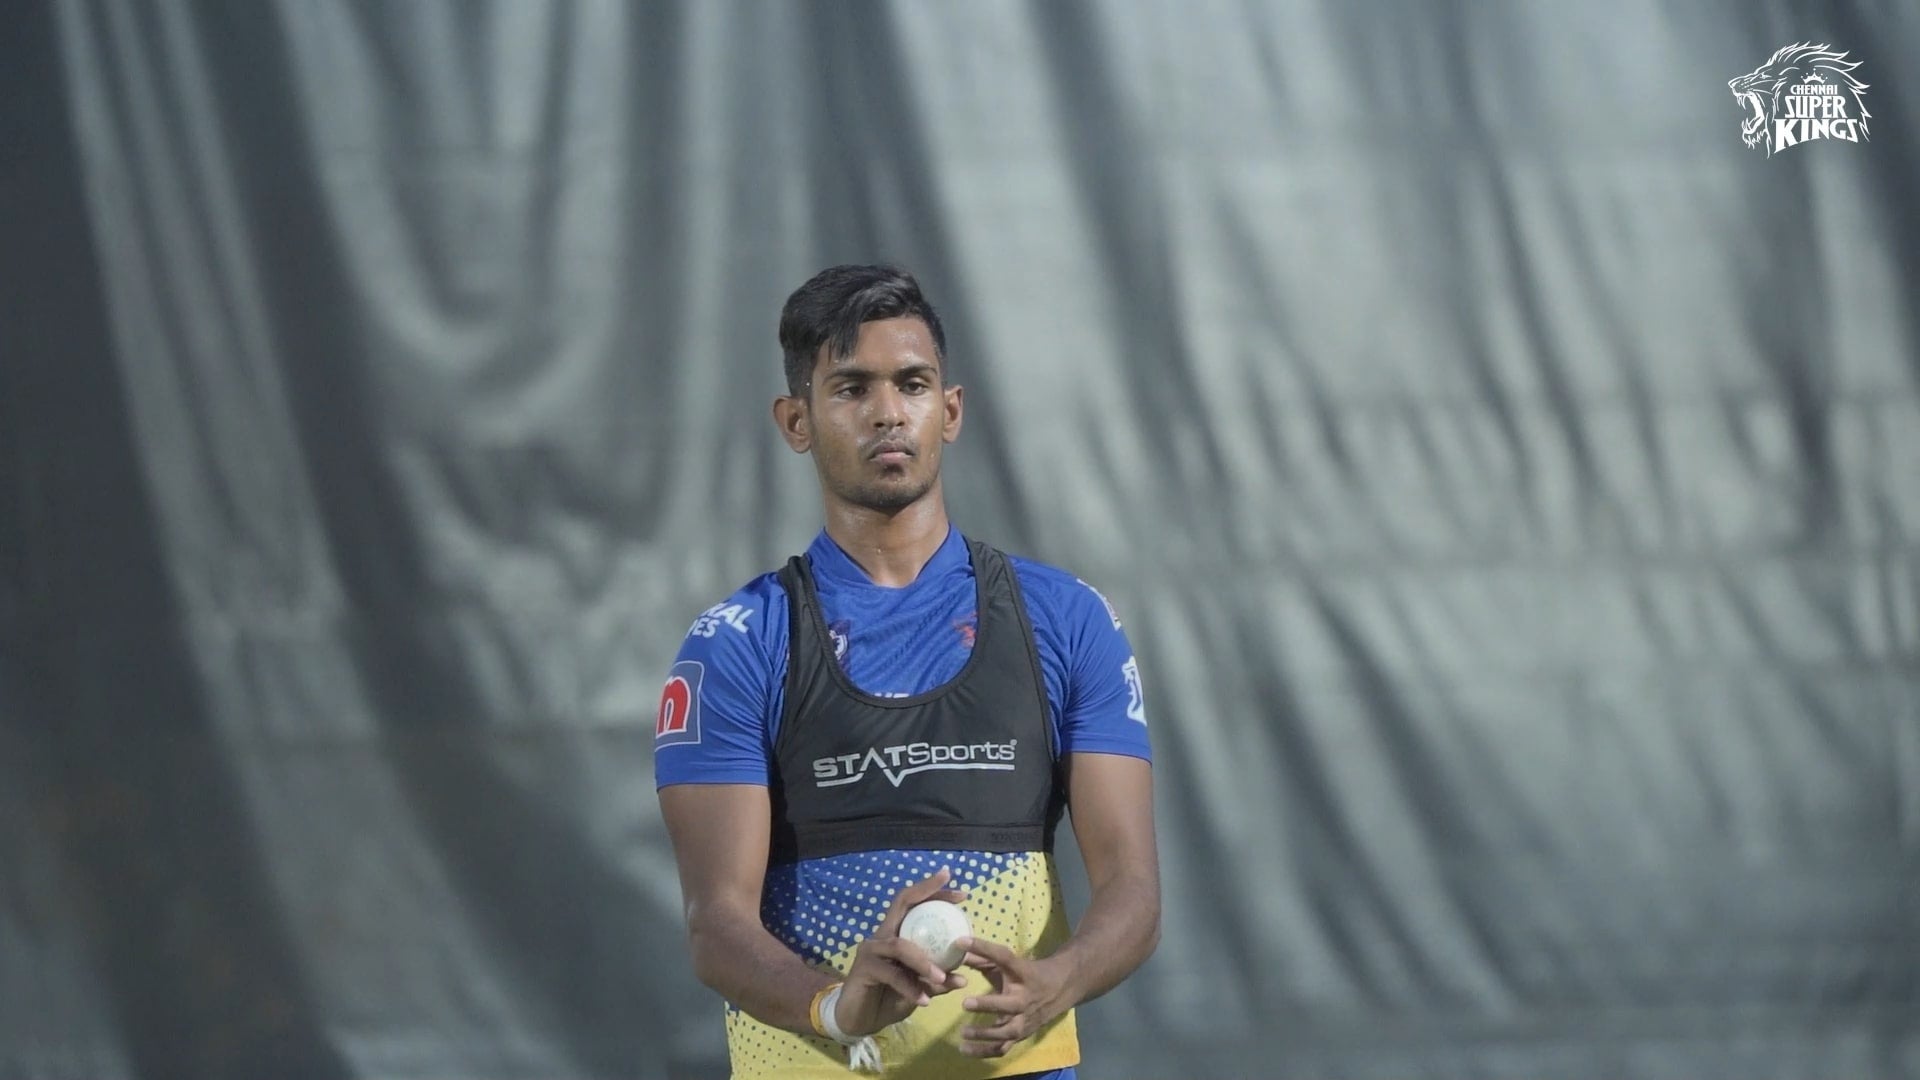 CSK Bowlers hit their stride before playoffs on JioTV